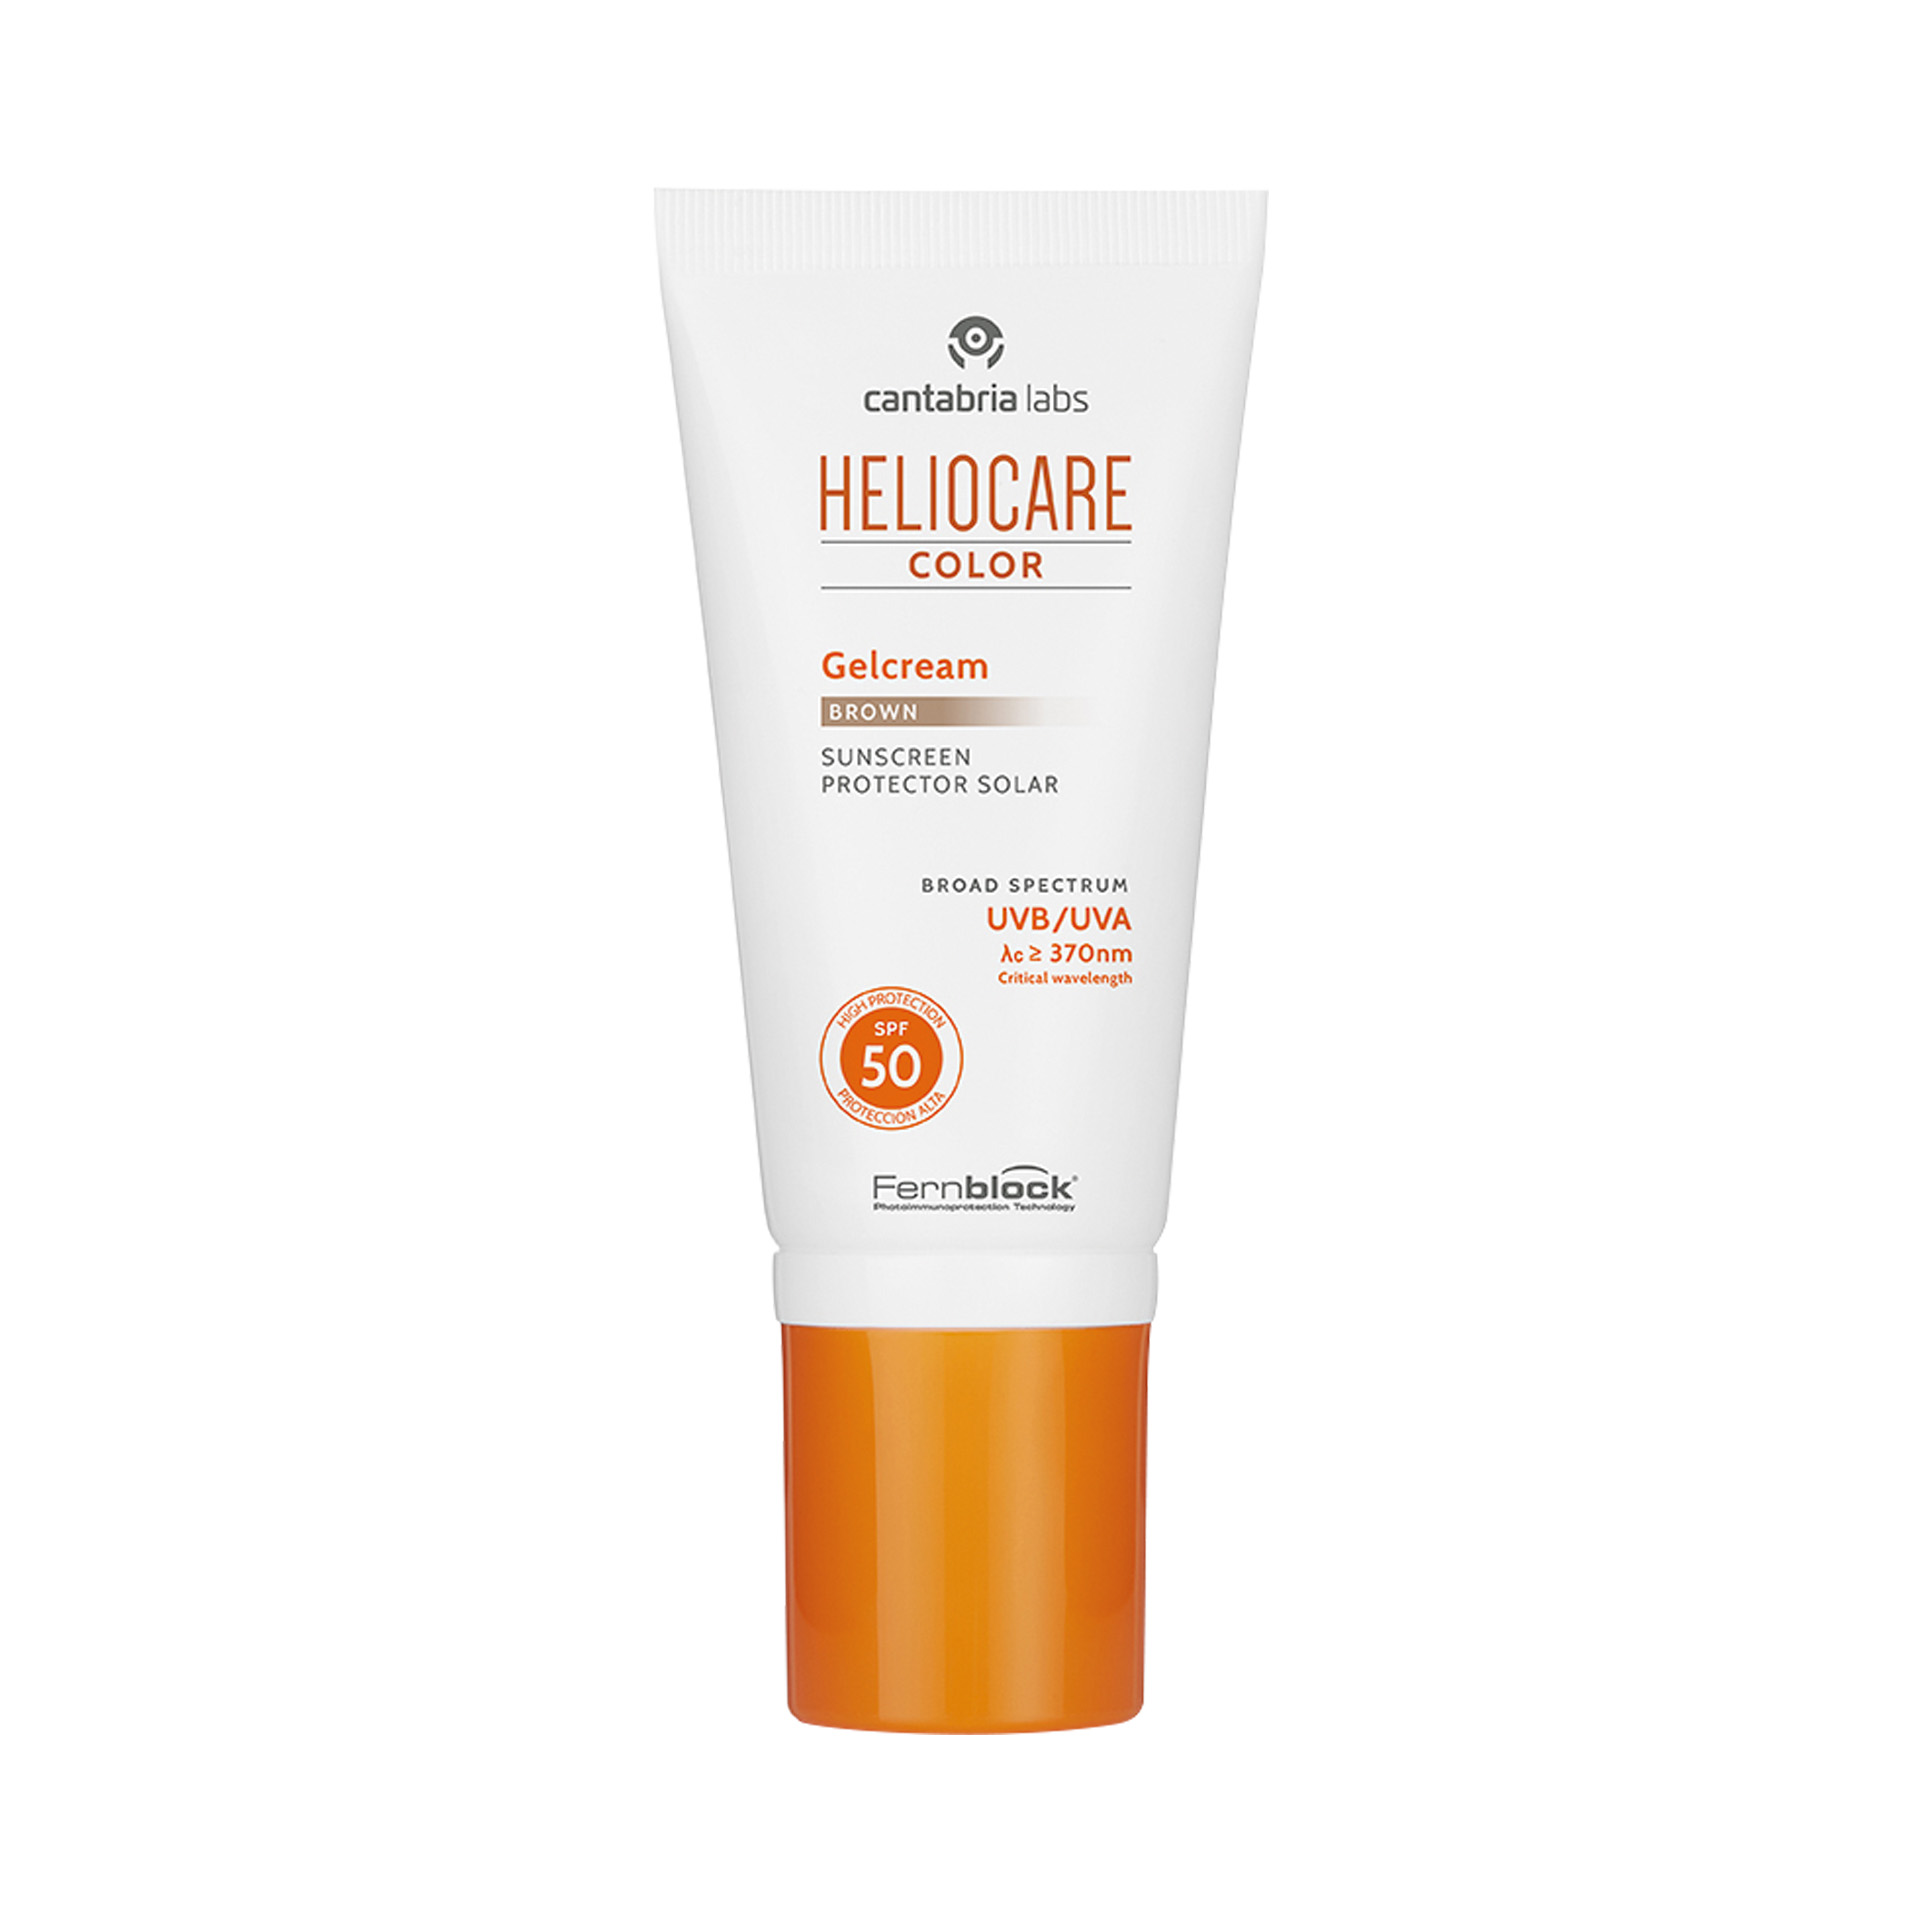 Image of Heliocare Color Gelcream Brown Spf50 50ml